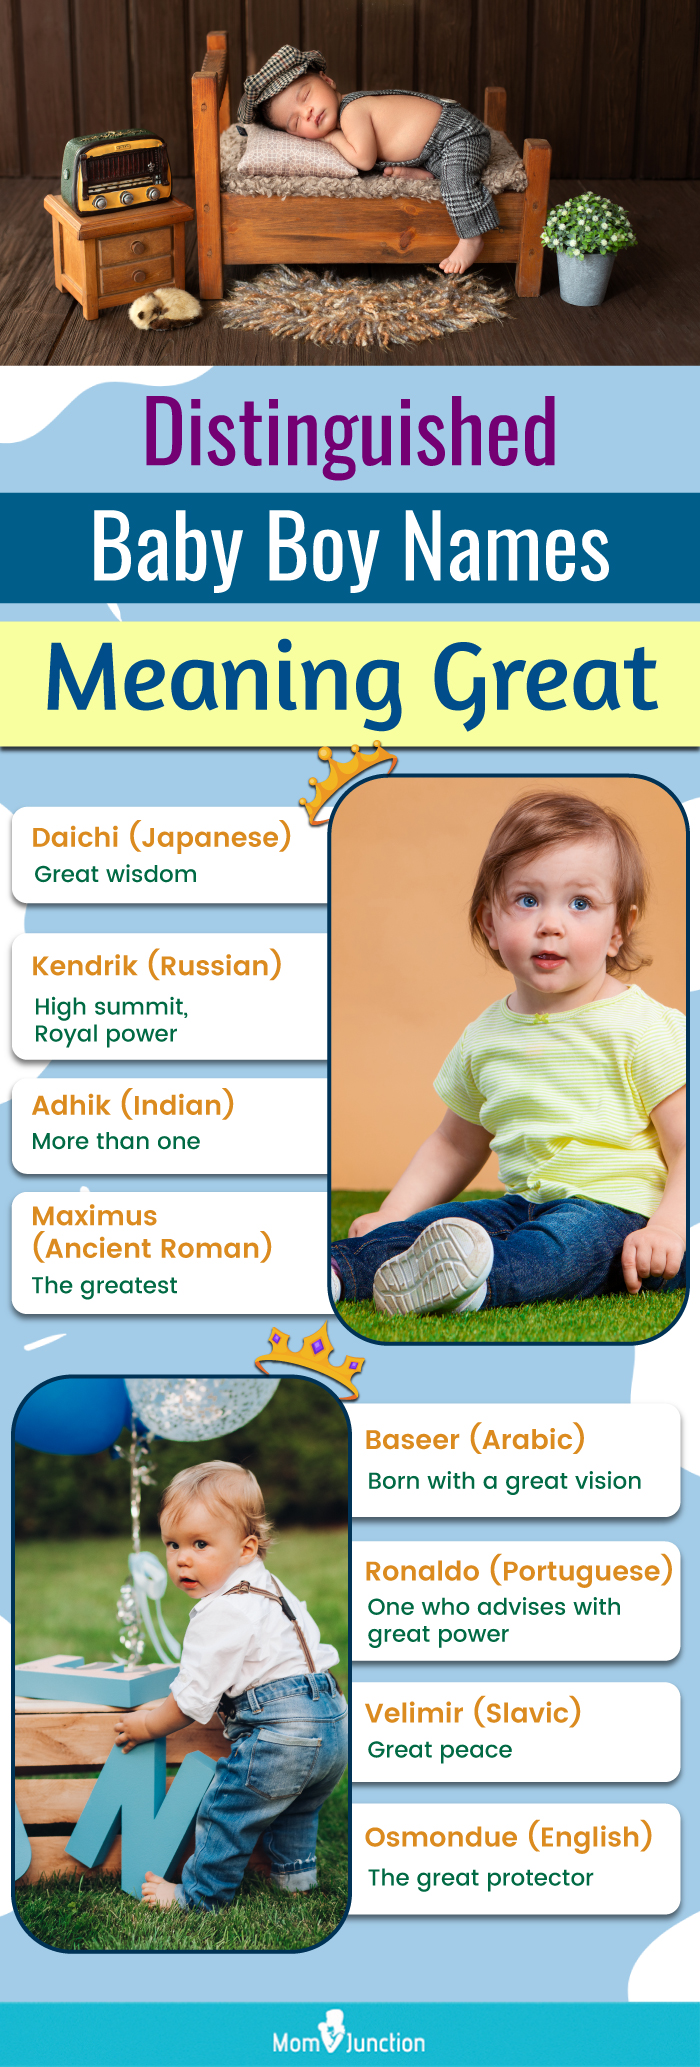 distinguished baby boy names meaning great (infographic)